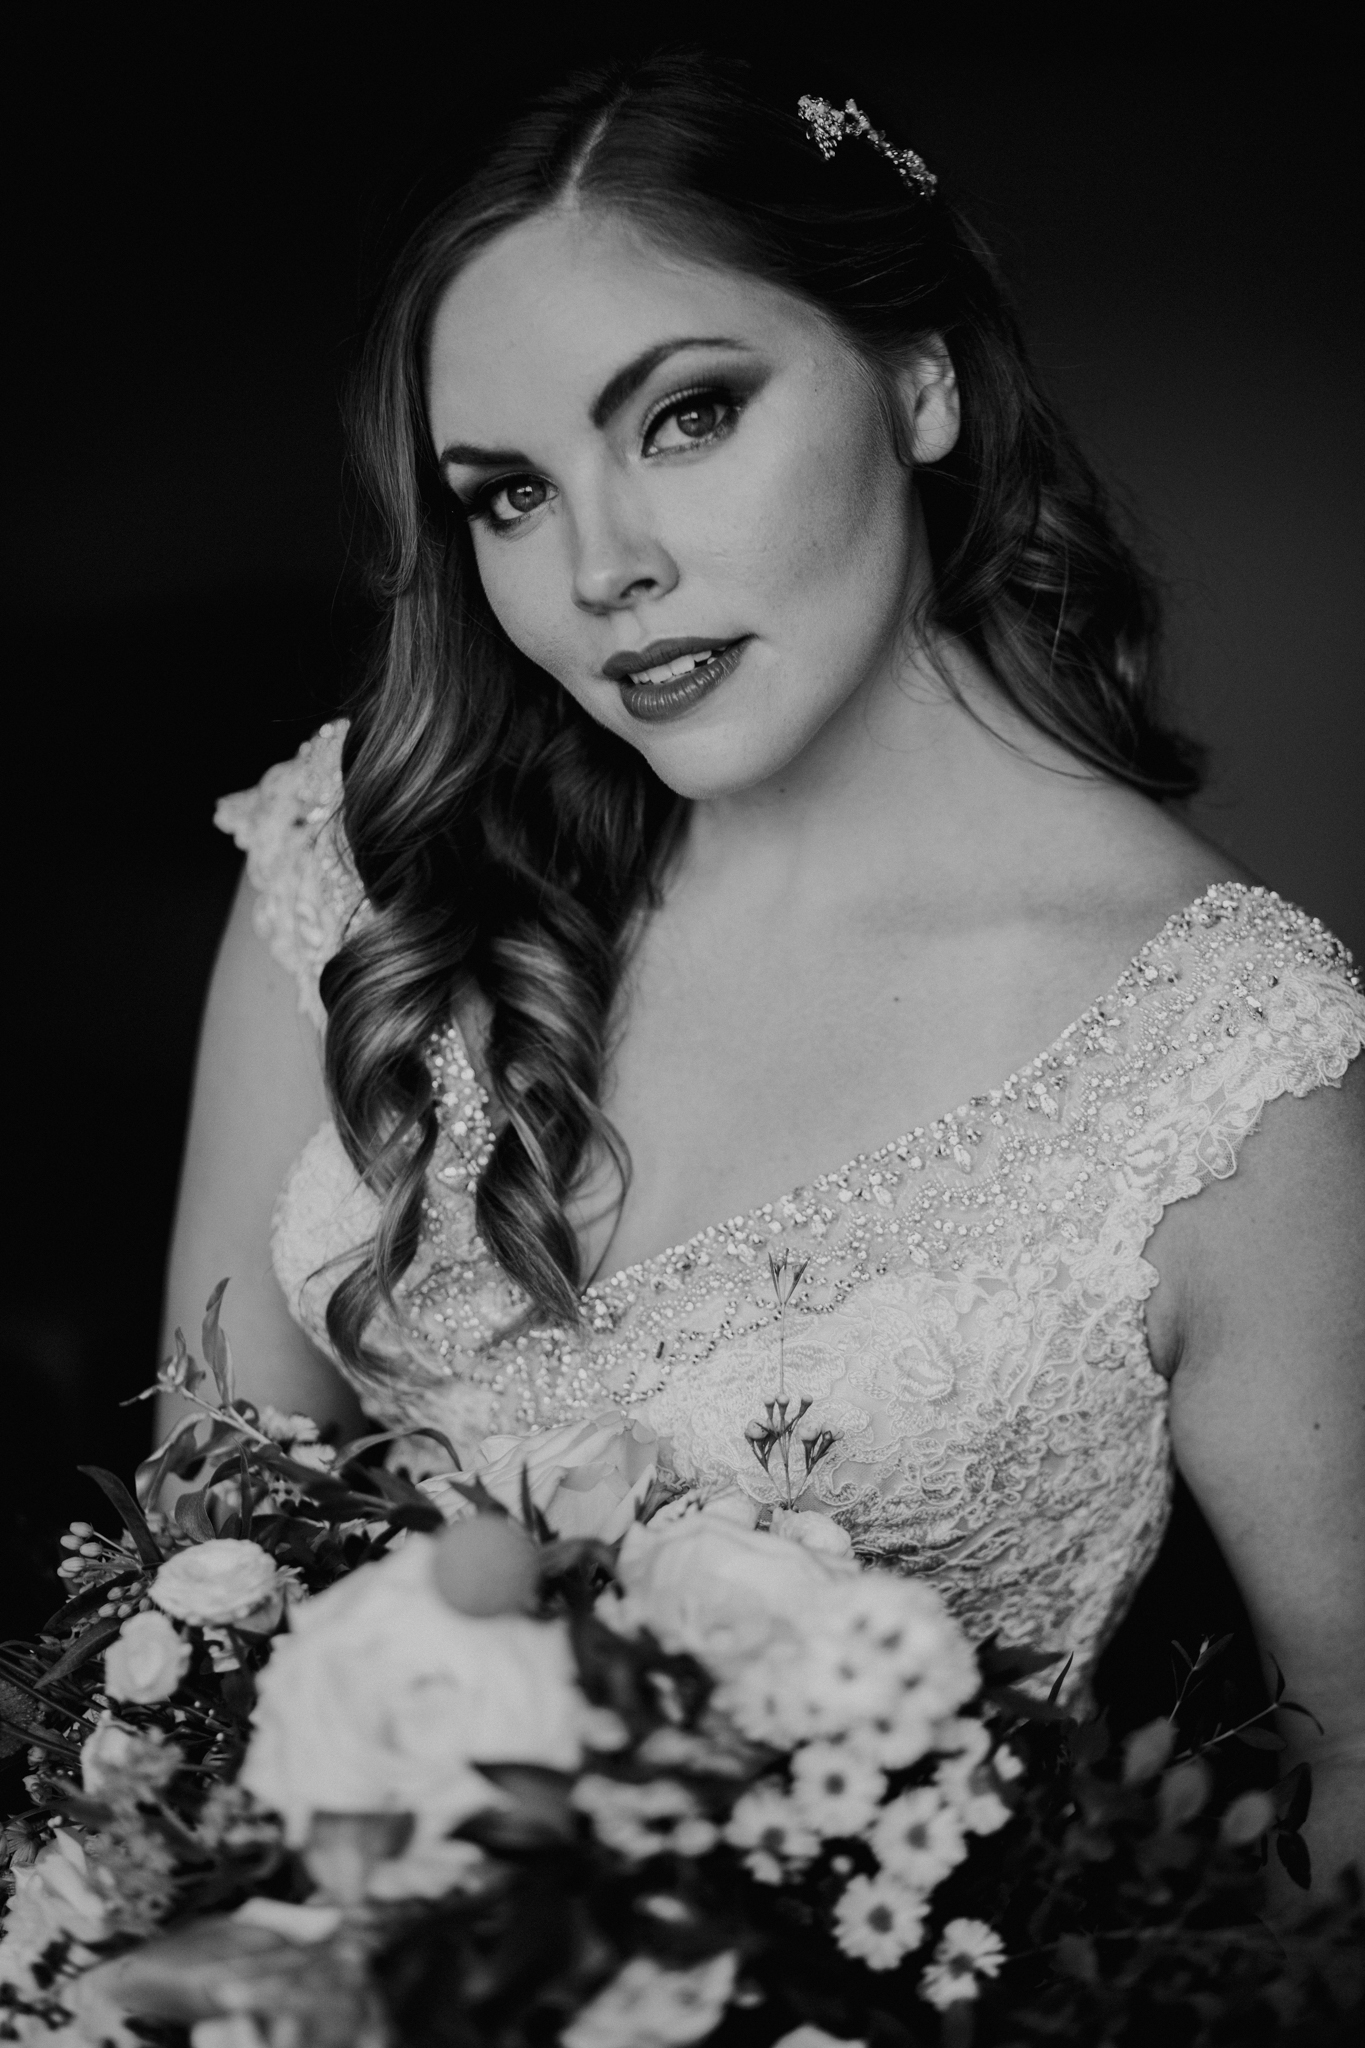 Black and white portrait of bride looking into camera holding flowers MN photographer